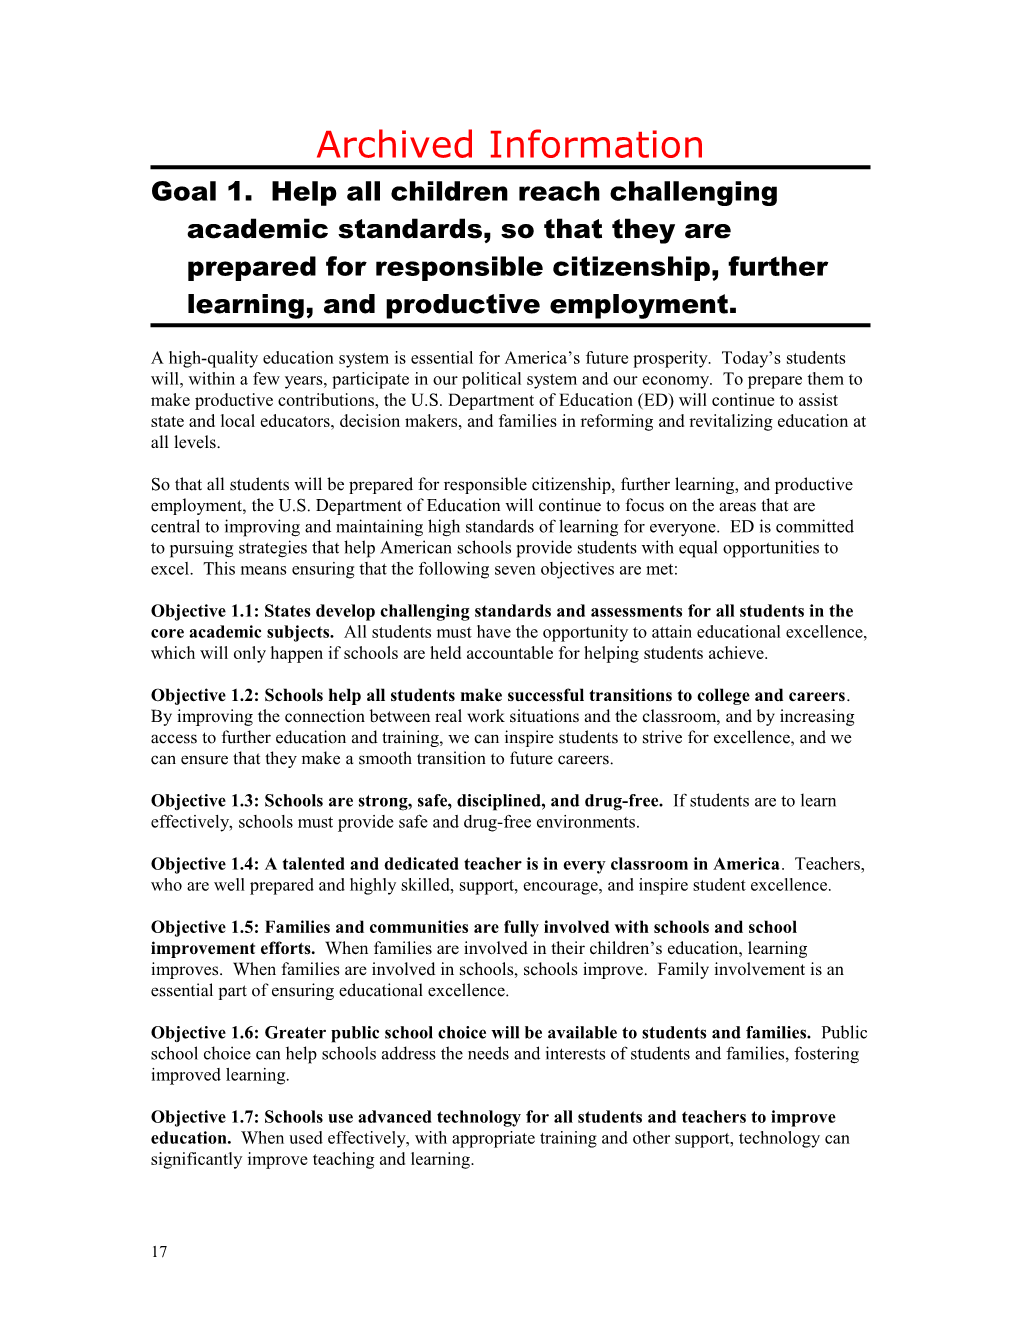 Archived: Goal 1 - Help All Children Reach Challenging Academic Standards, So That They